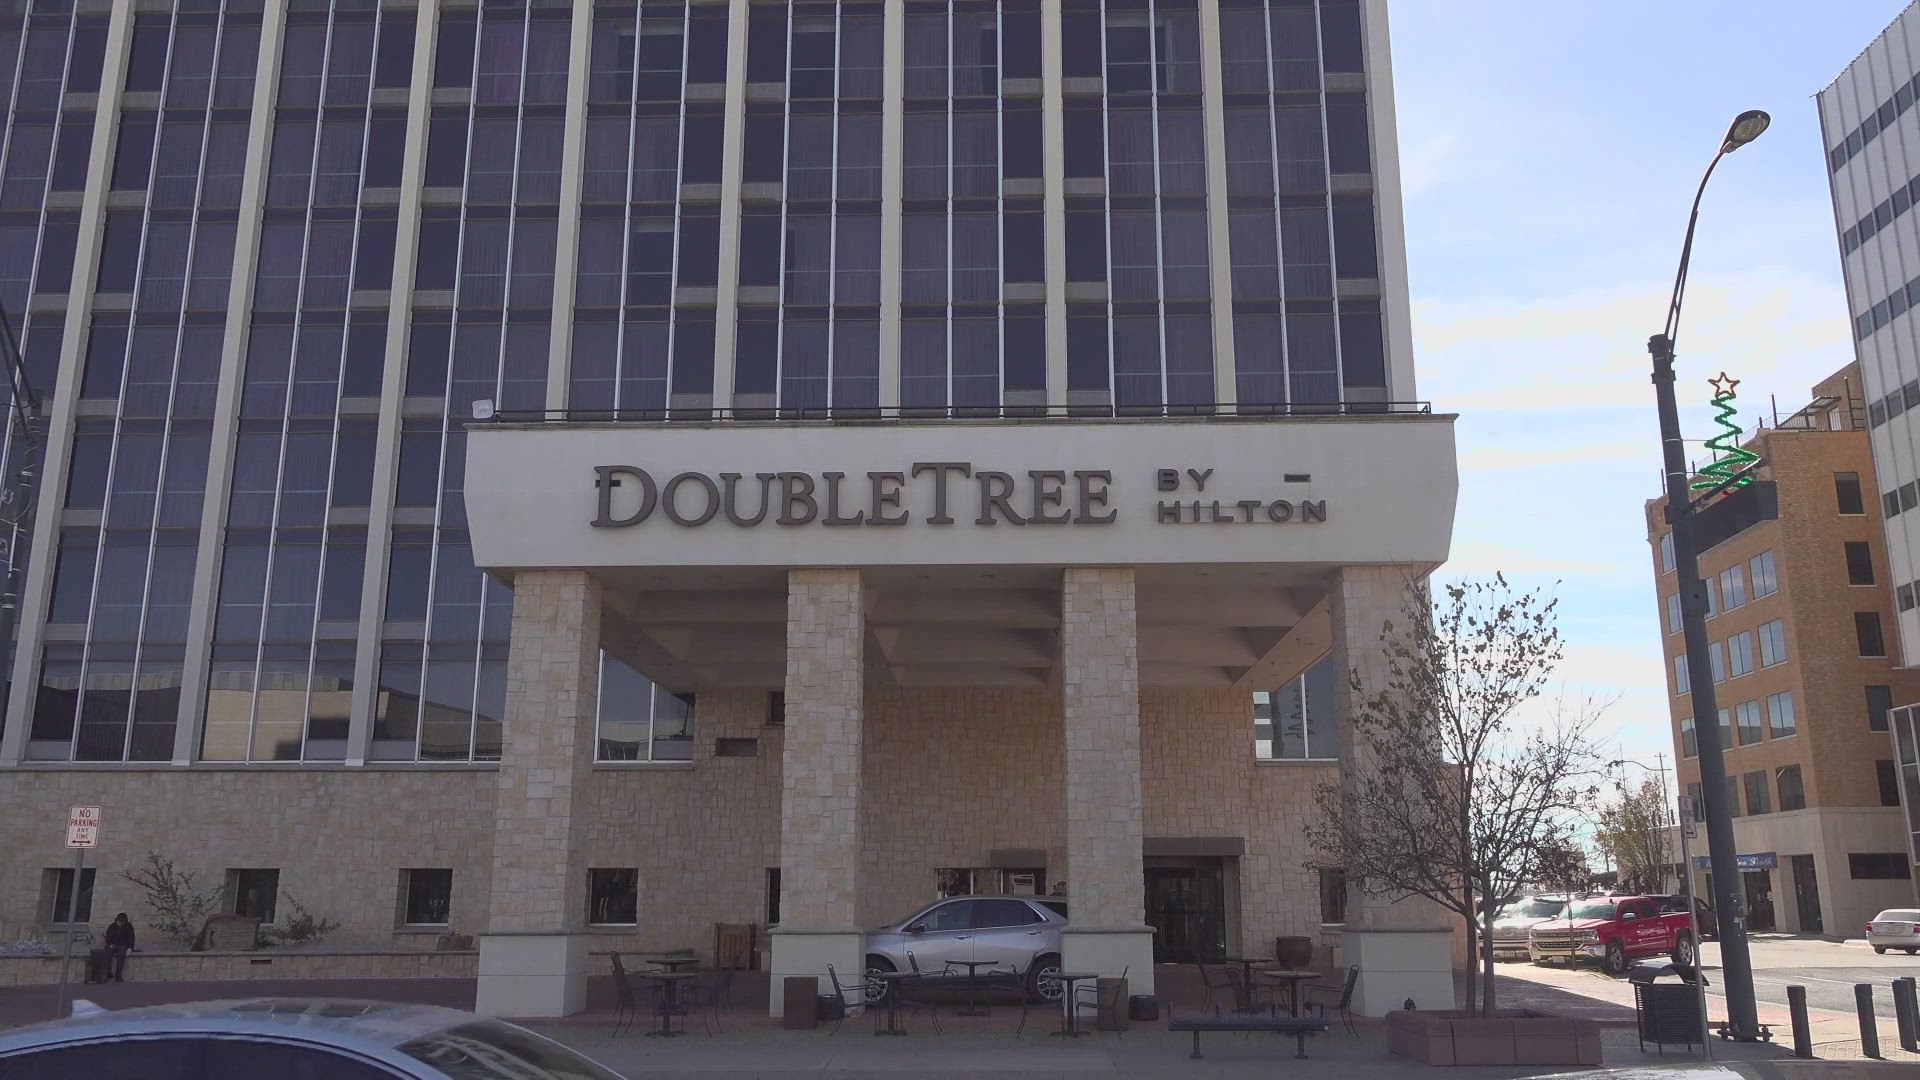 DoubleTree was asking for $15 million in funding to make renovations to the hotel and they were not granted that money.